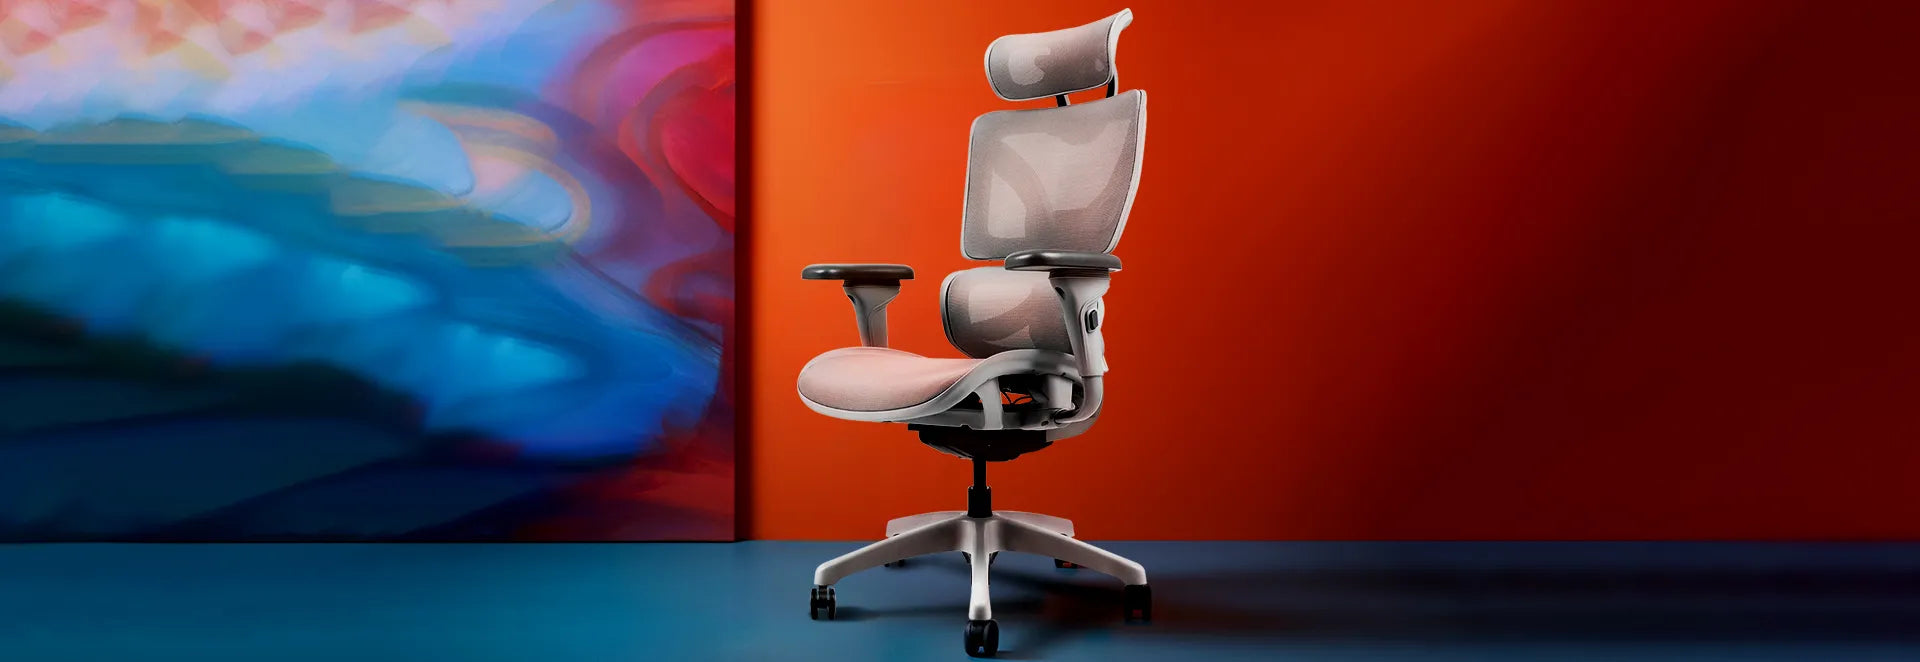 Stylish and modern ergonomic office chair, with adjustable settings for personalized comfort, set against a vibrant background.